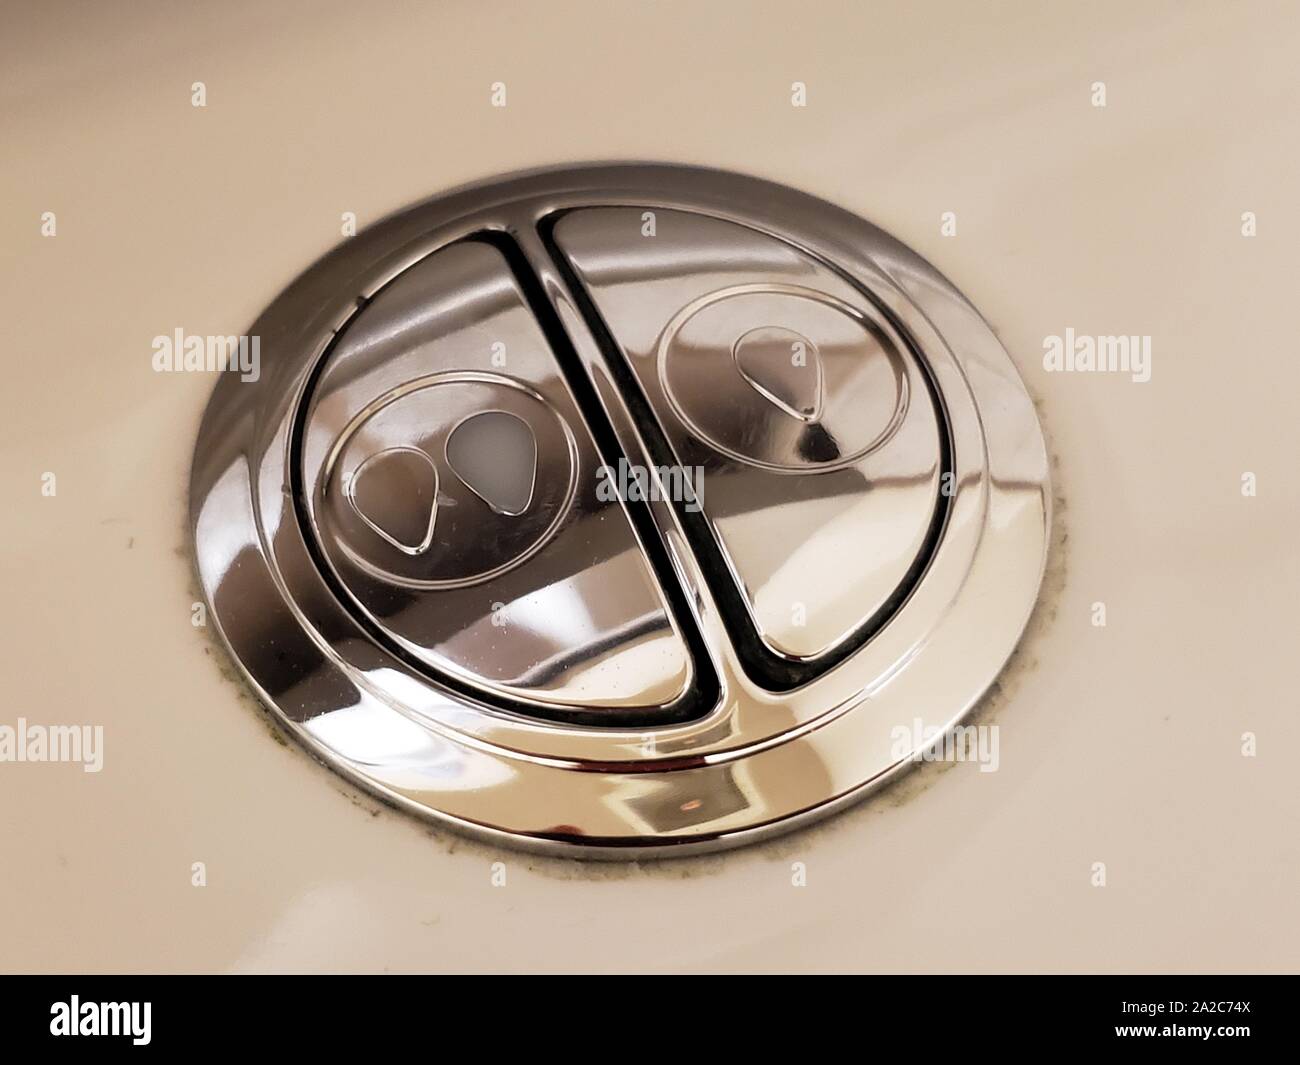 Close-up of buttons on a dual flush toilet system, used to conserved water by allowing users to select two different levels of toilet flush volume, August 2, 2019. () Stock Photo